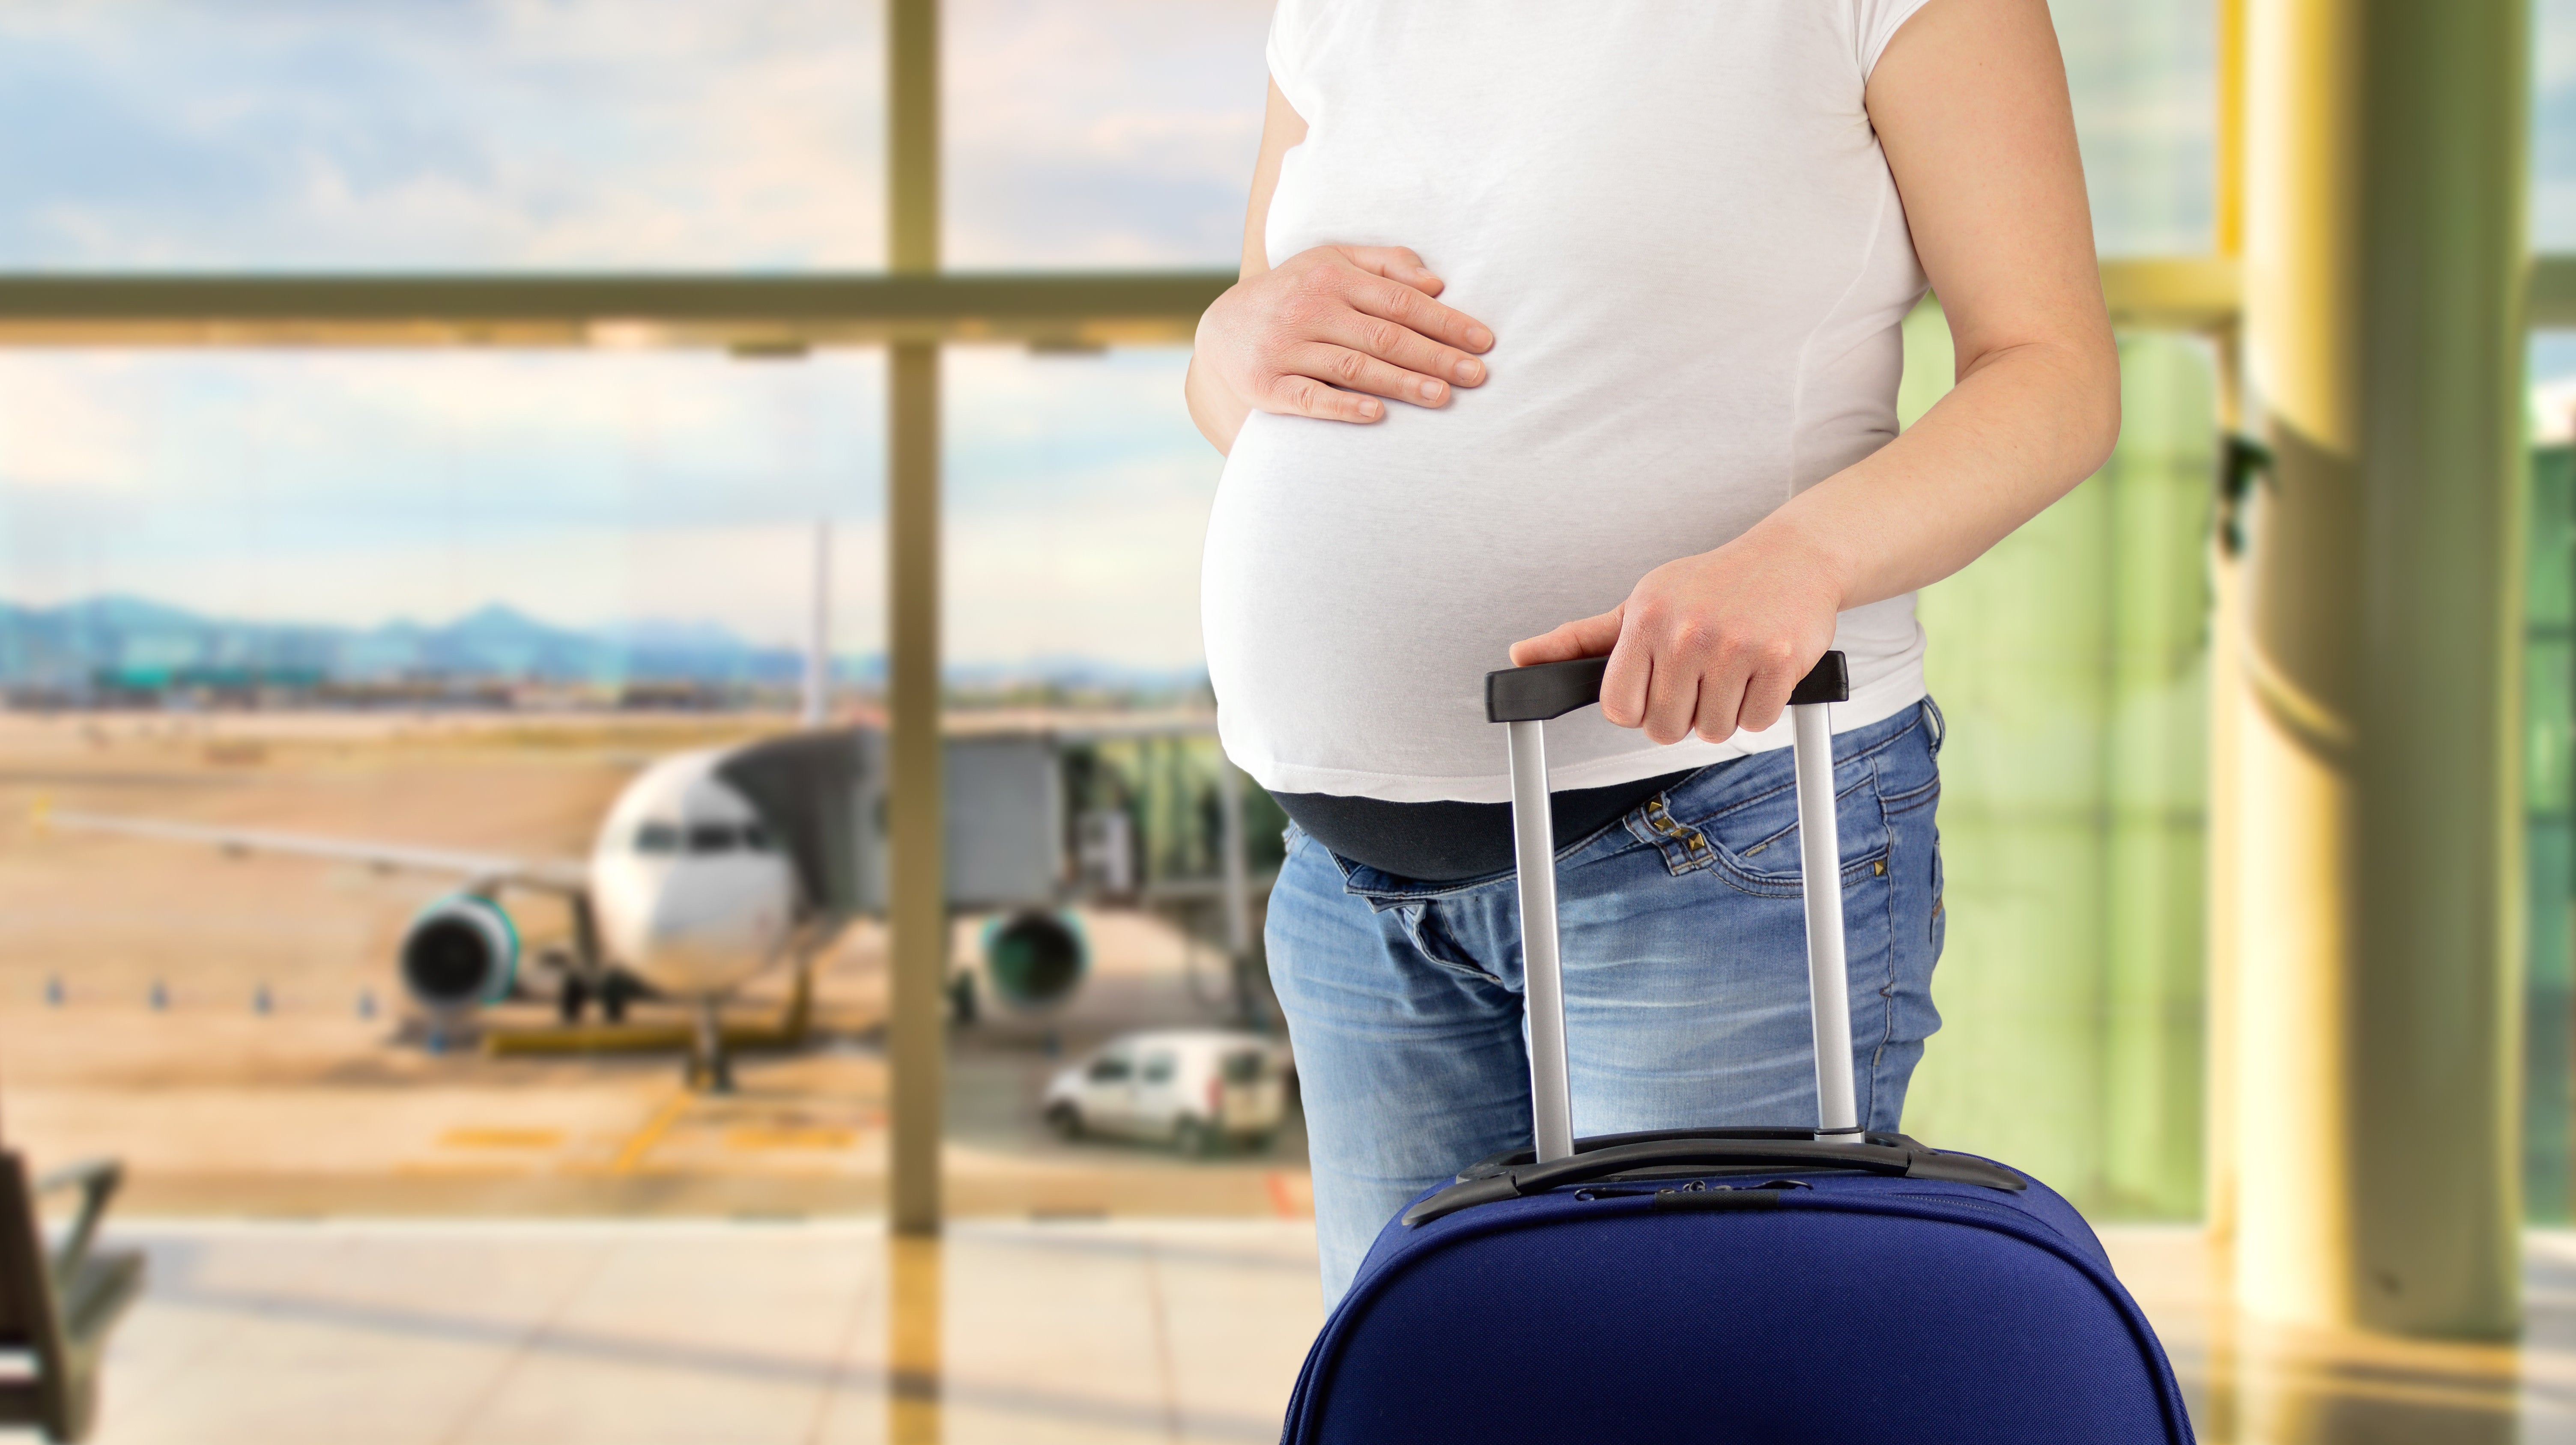 Don’t Want To Pay Extra Bag Fees? Fake A Pregnancy